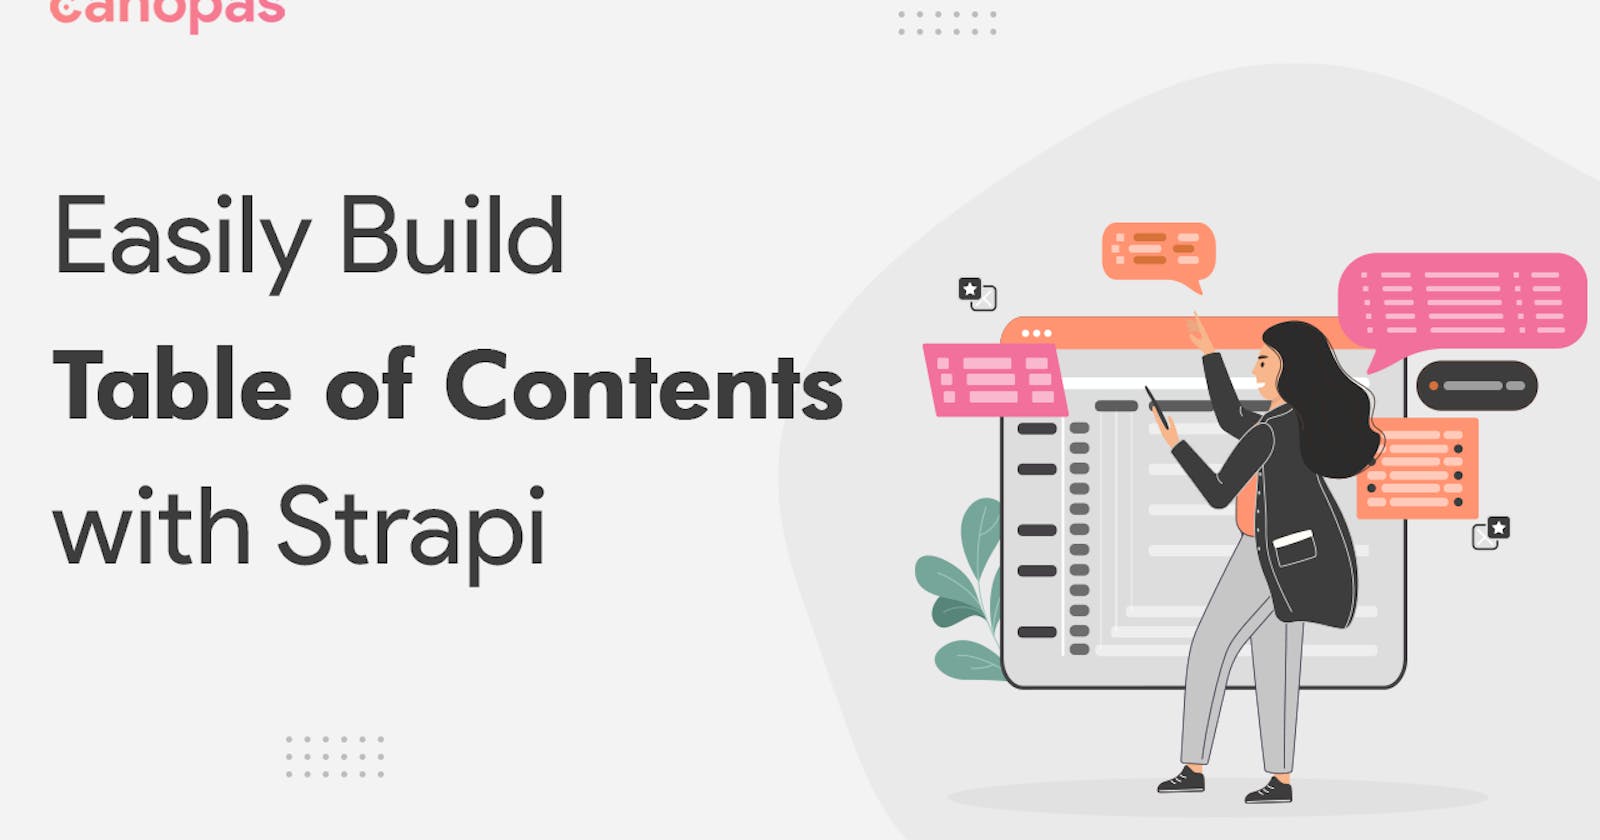 Learn How to Build Table of Contents using Strapi for your blog.